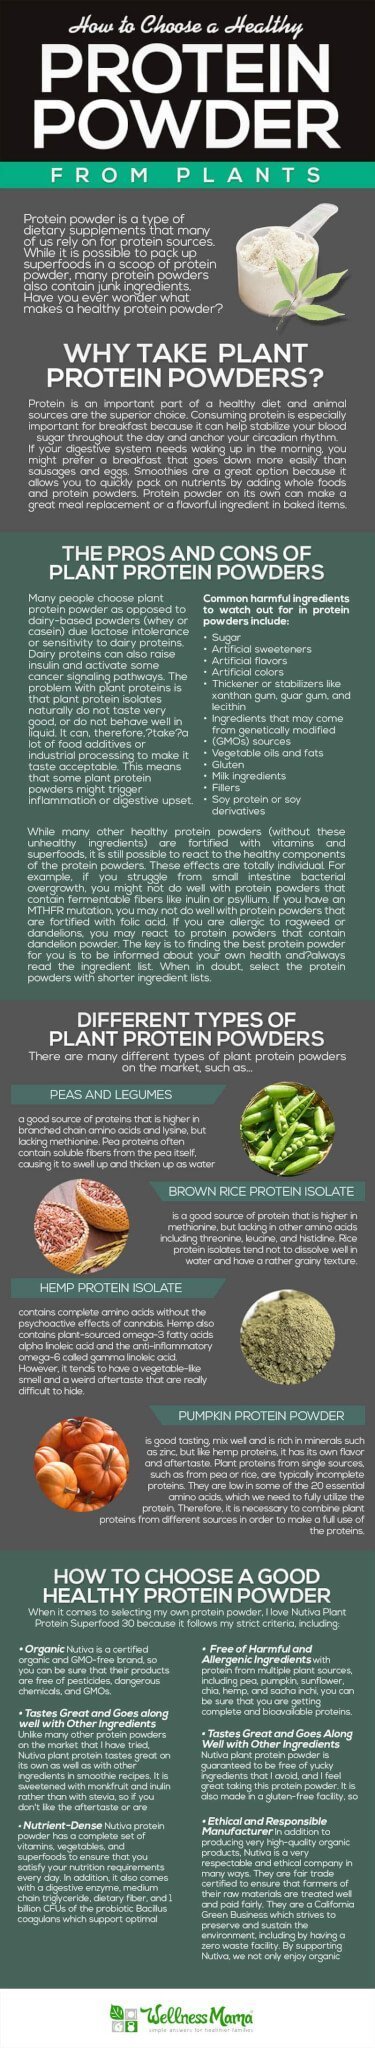 Plant-based protein powder can taste pretty bland and have some sneaky bad ingredients. Find out how to choose a good protein powder without the junk!